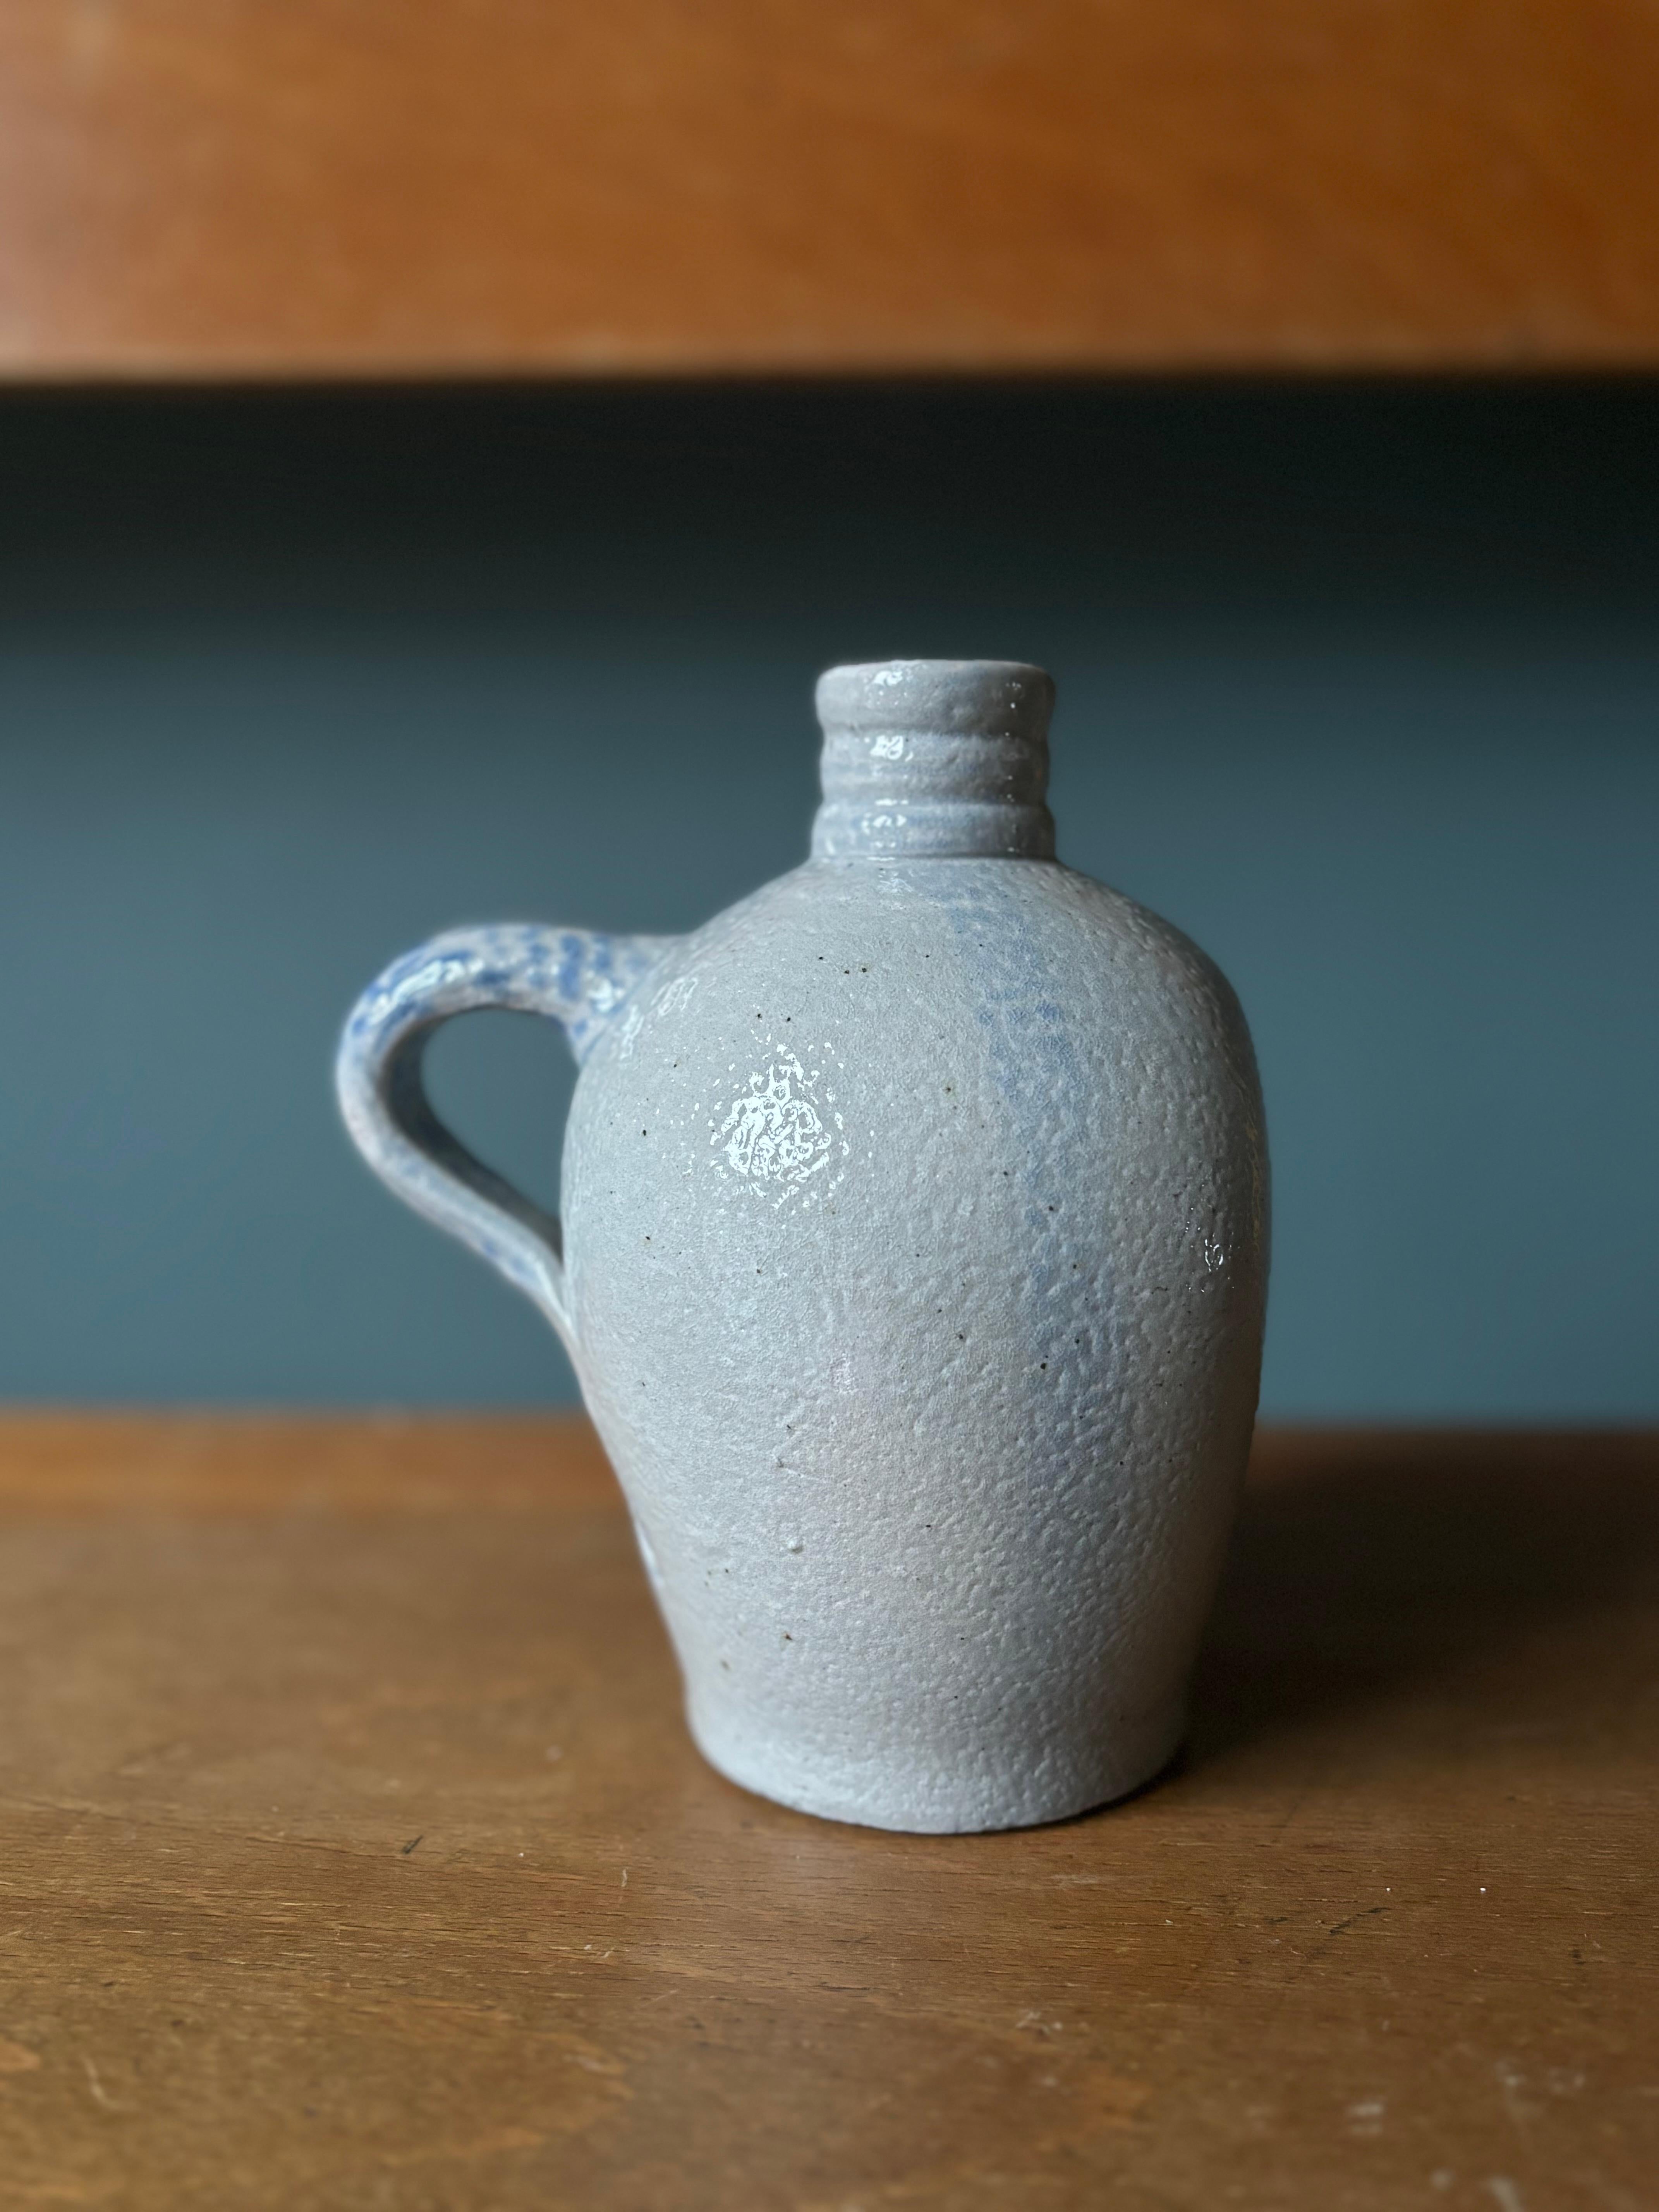 Decorative stoneware bottle vase originally used for alcoholic liquor in Denmark in the 1940s. Thick light grey salt glaze with baby blue specks along the handle and sides. Asymmetrical shape with flat front, and at the base is written “Mindste